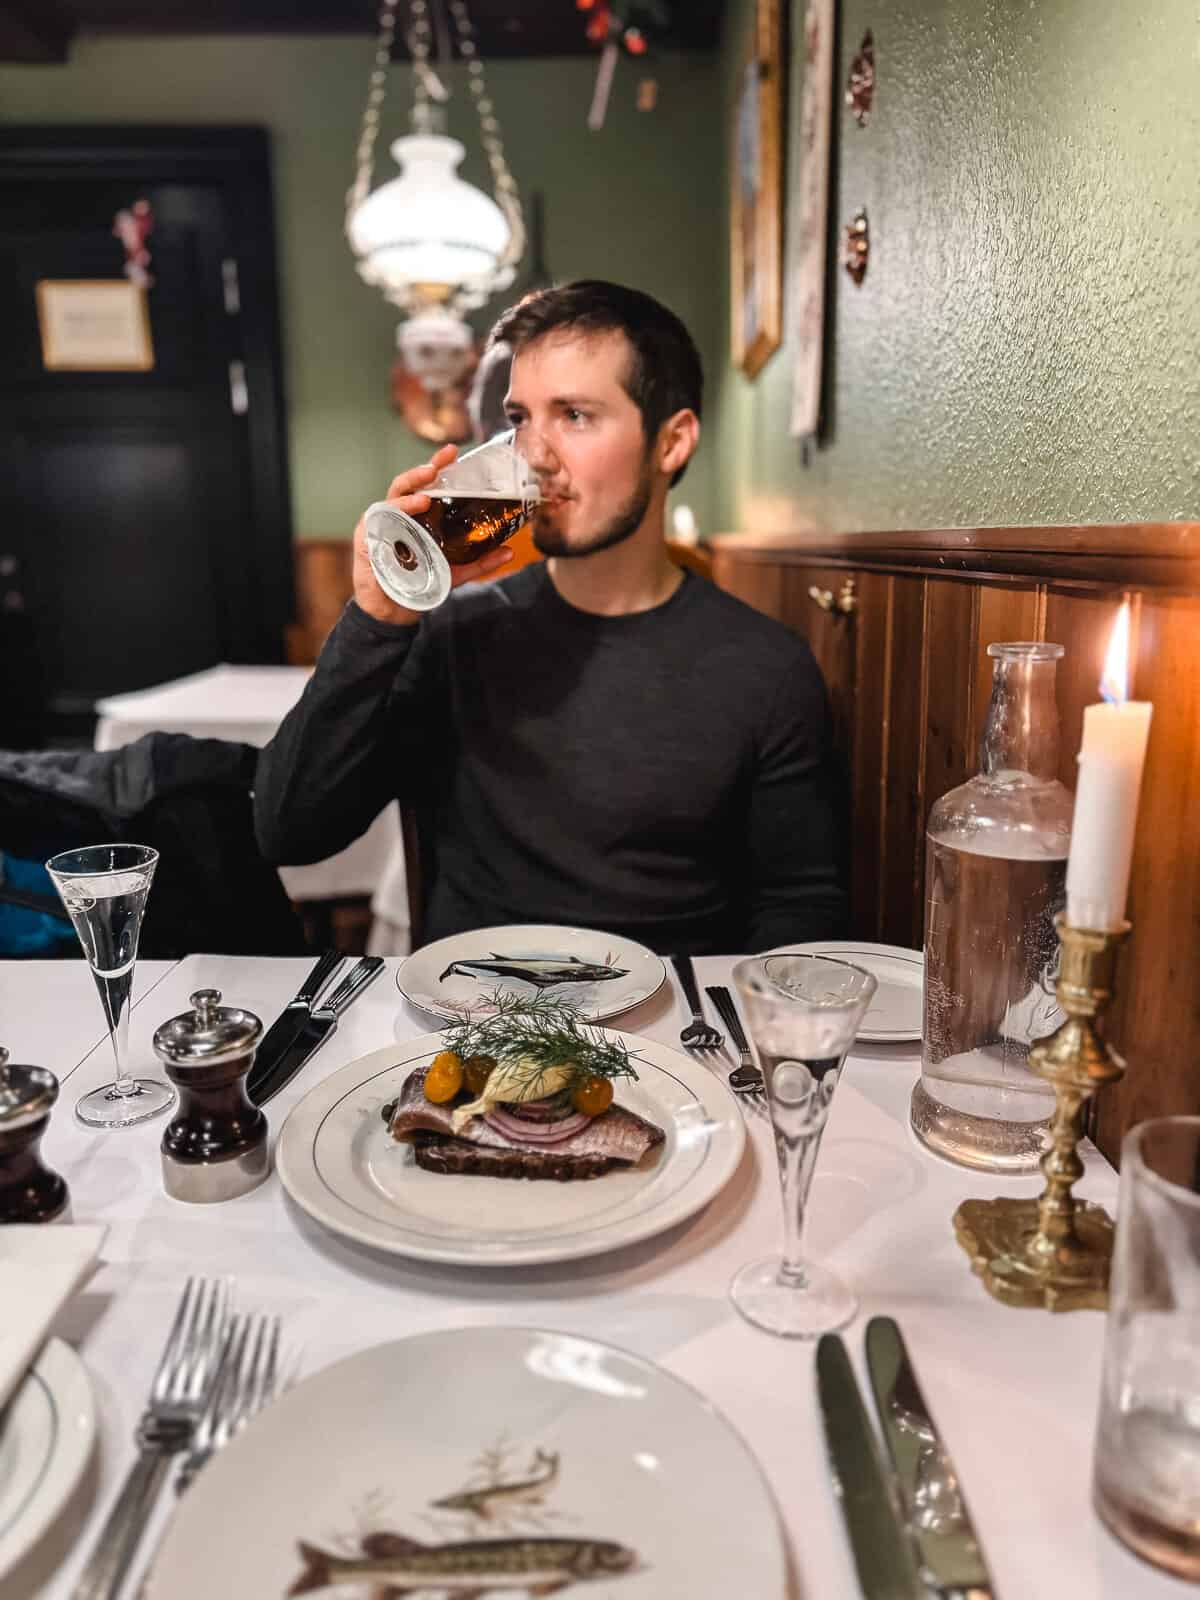 A man enjoys a beer in a cozy, traditional European restaurant, with a focus on a plate of delicately arranged herring, onions, and herbs in front of him, surrounded by elegant tableware and a romantic candlelit setting.